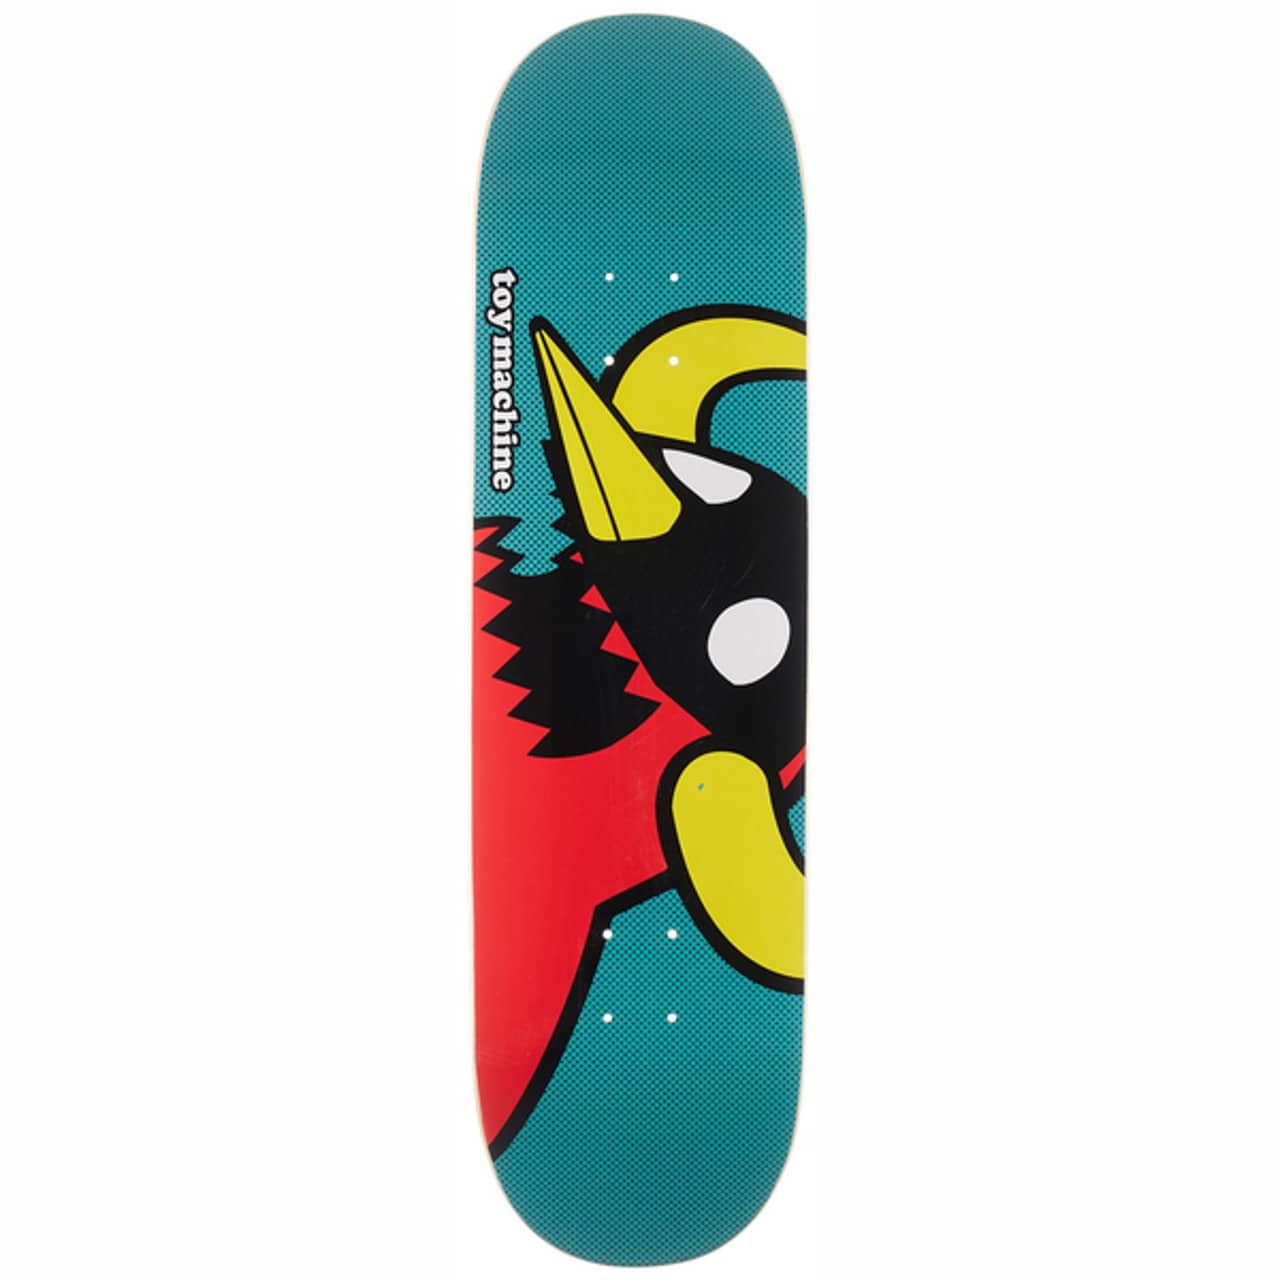 Toy Machine Masked Vice Monster 8 5 X 32 38 deck